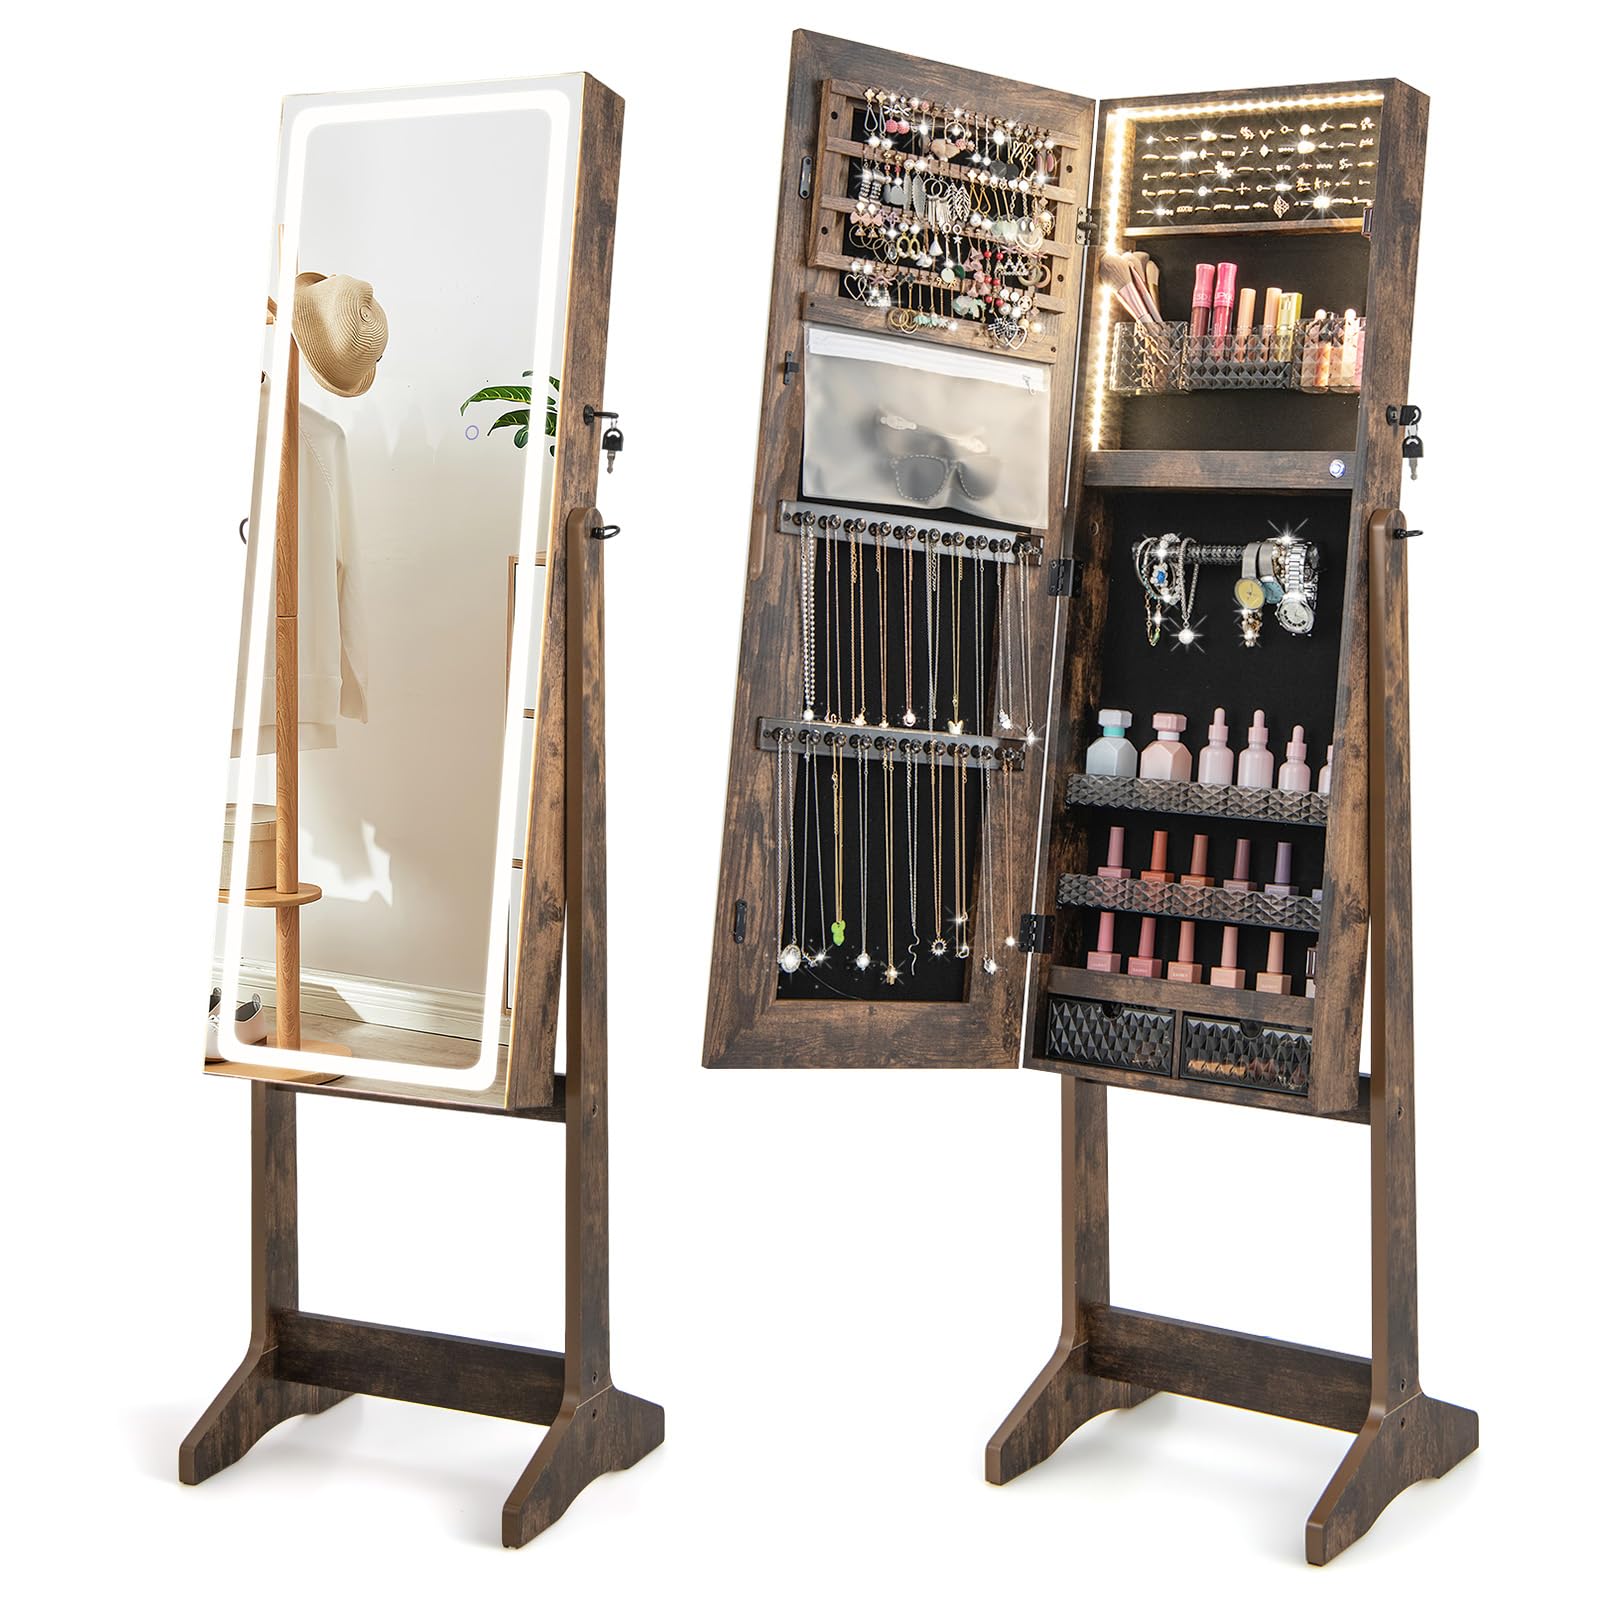 CHARMAID LED Mirror Jewelry Cabinet - Lockable Jewelry Armoire